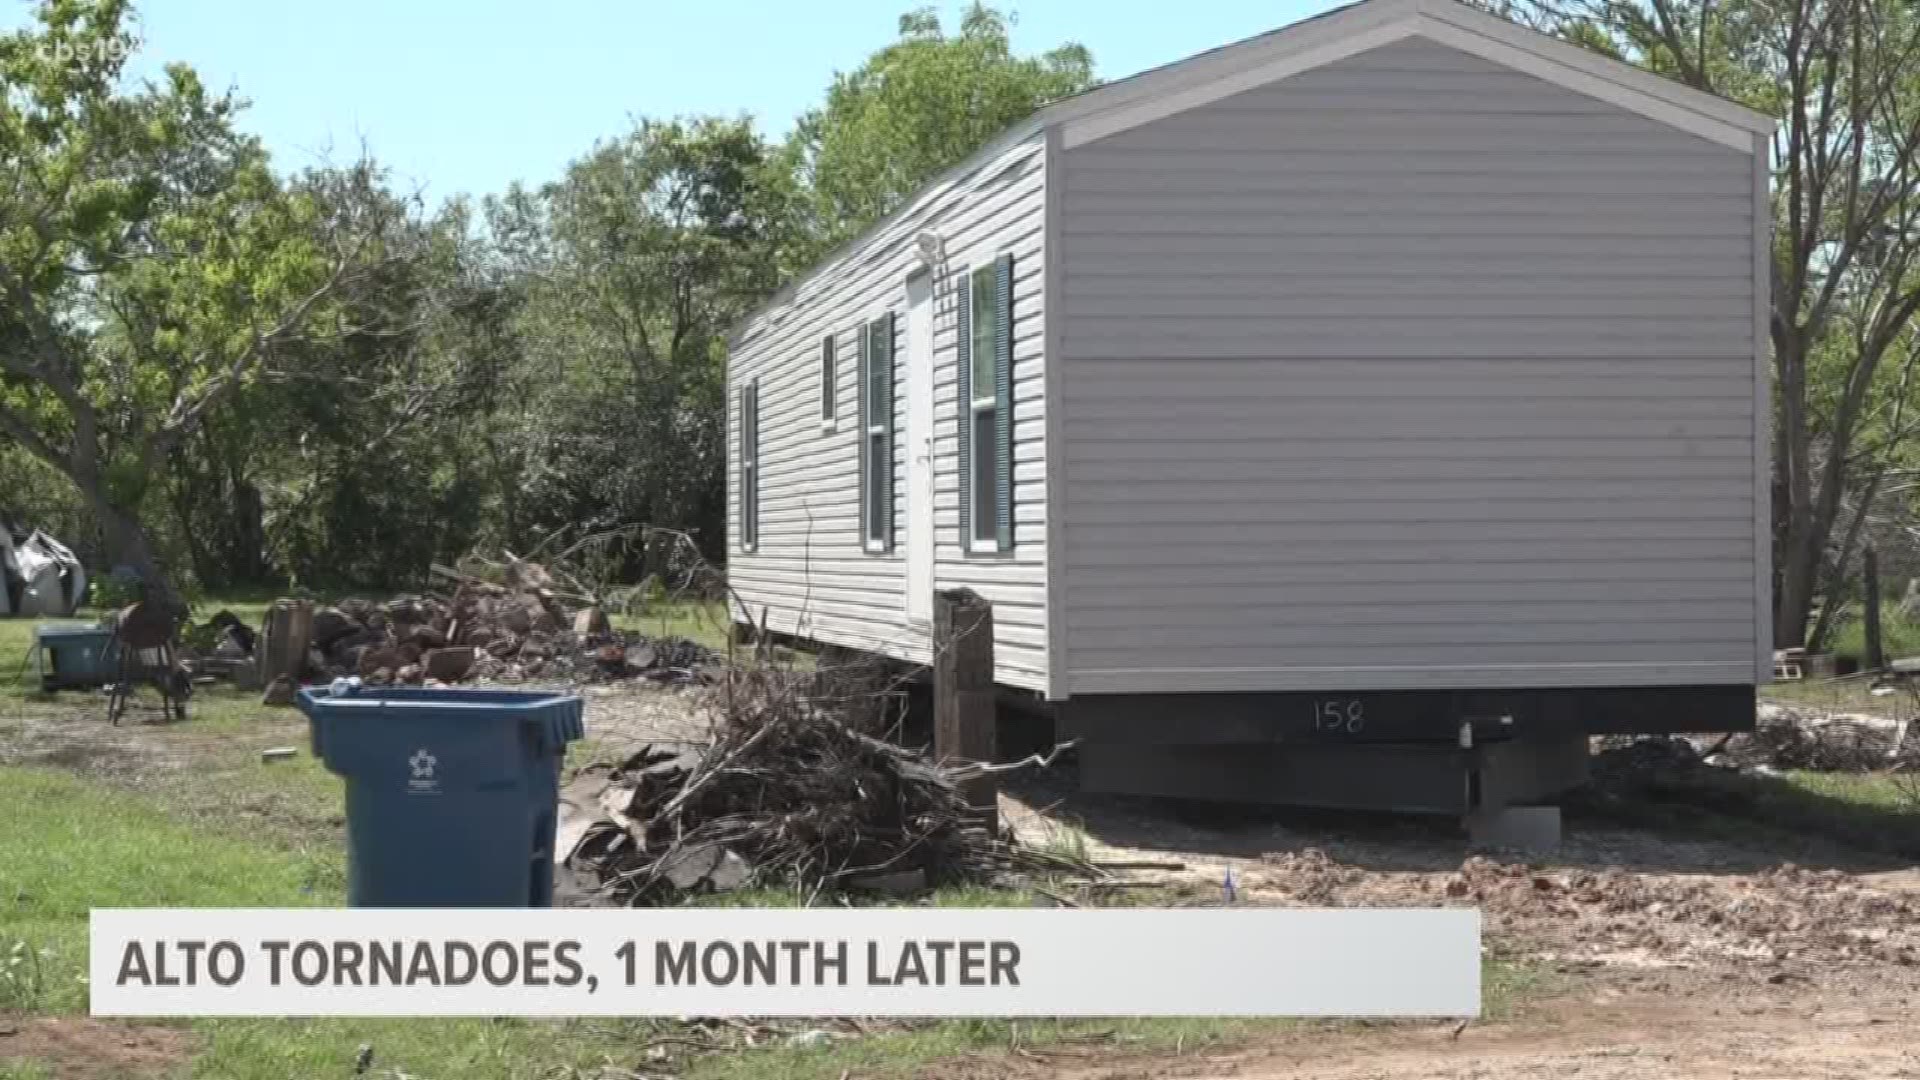 After much debate between concerned residents and the Alto City Council, members voted to approve the placement of a mobile home for a family left homeless after the tornadoes.